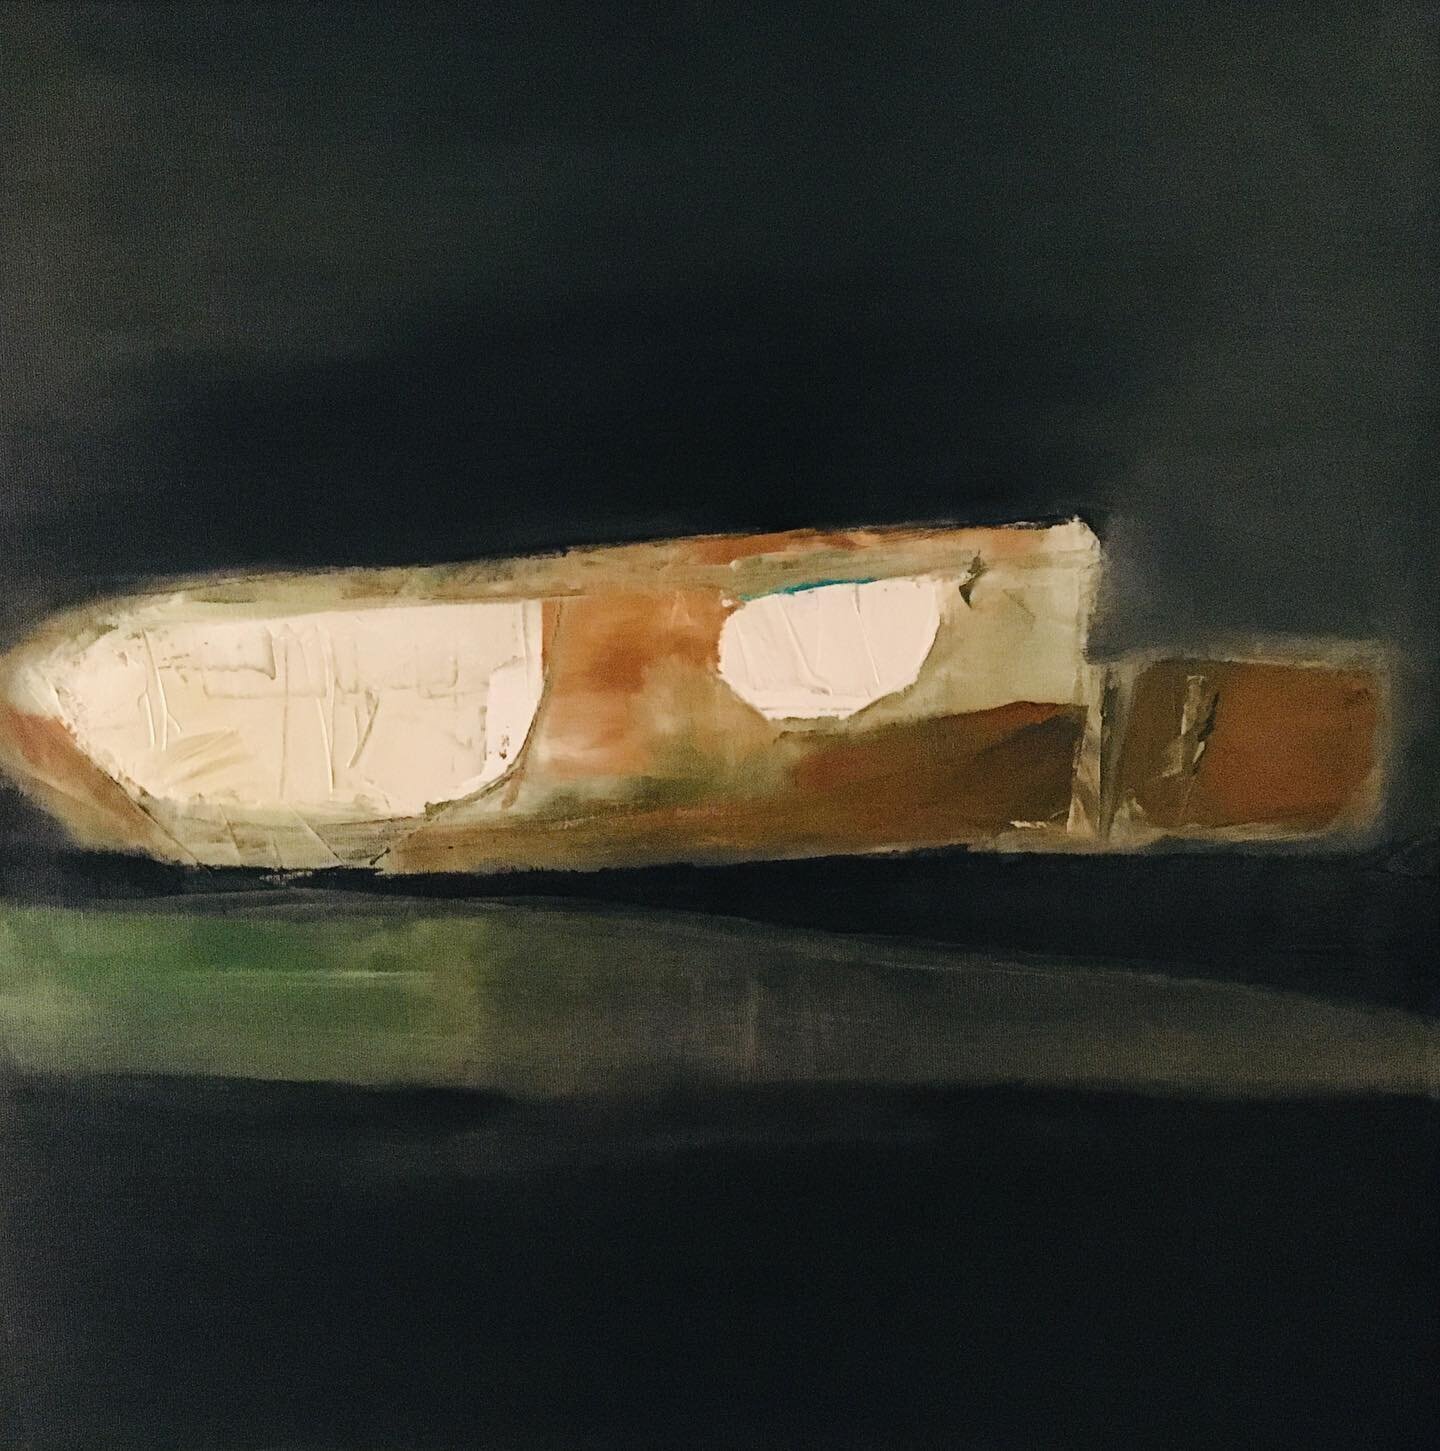 THE GROUND BENEATH OUR FEET - I&rsquo;m working on a series of paintings about the rich contents of the ground beneath our feet. Here&rsquo;s the first one...Oil on canvas. 62x62cm. More on my website: 
www.louise-holgate.com
#buyartonline
#abstractm